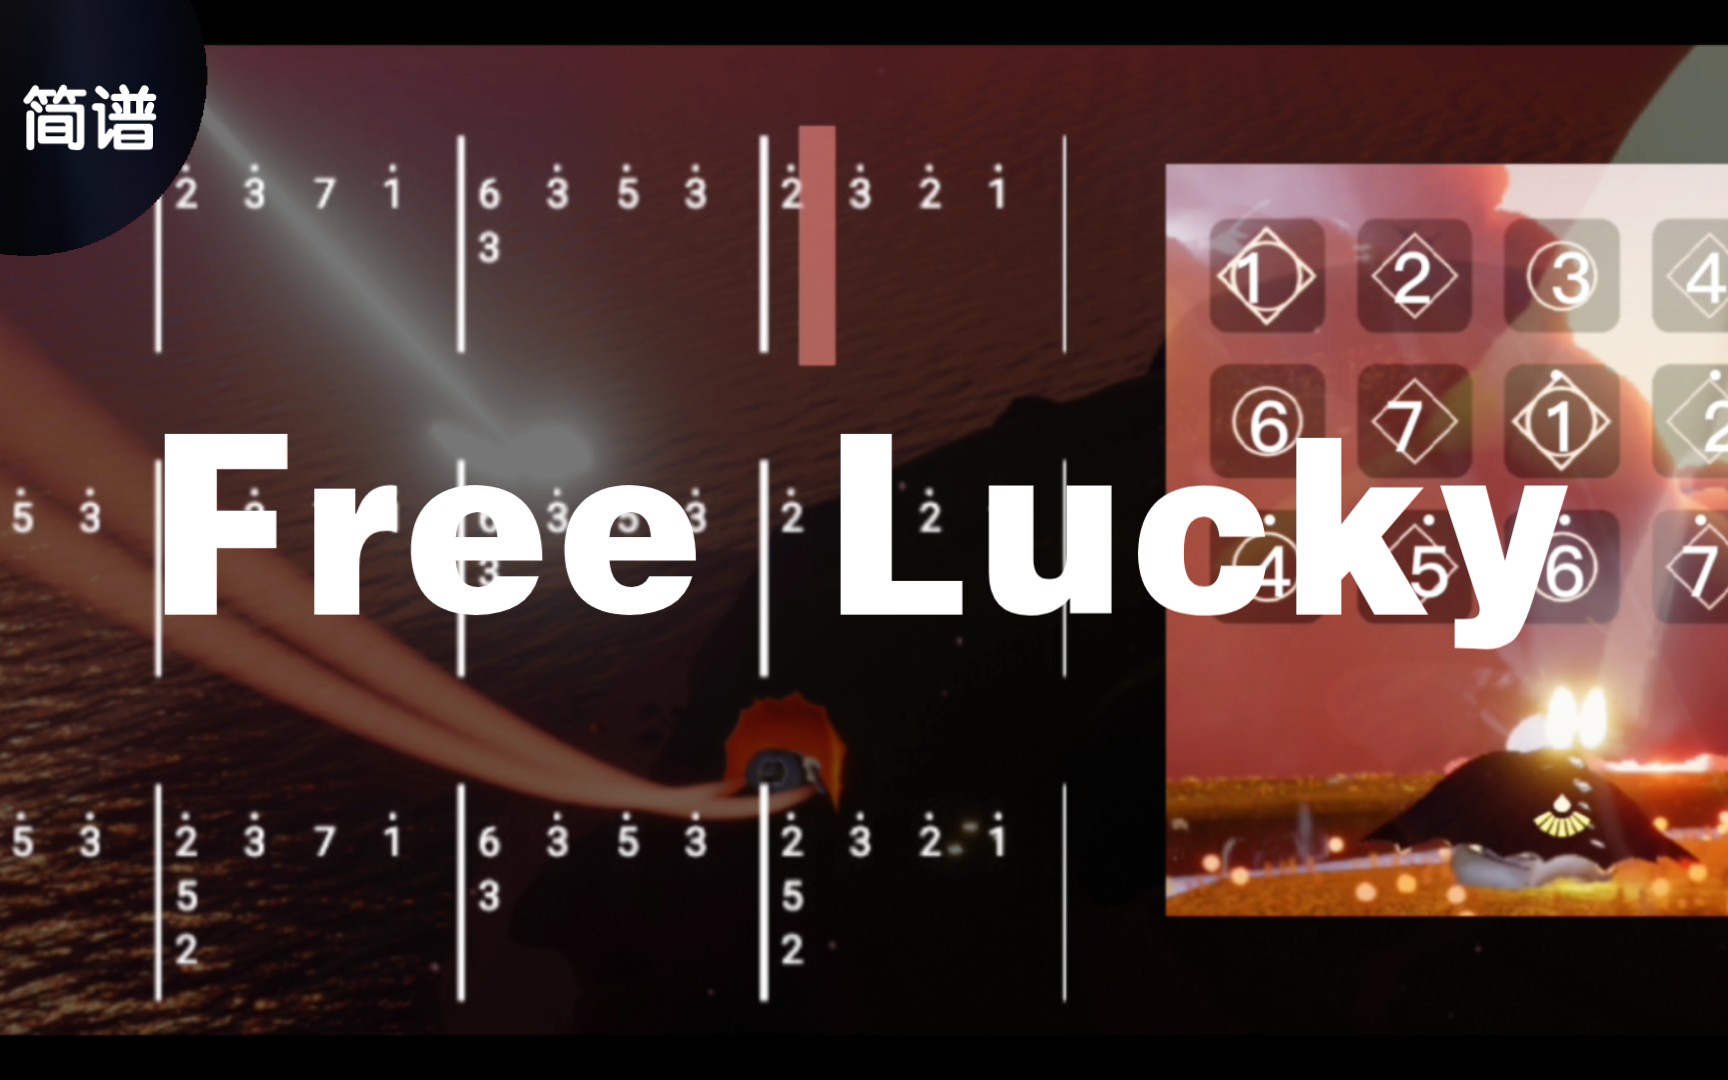 free lucky吉他谱图片